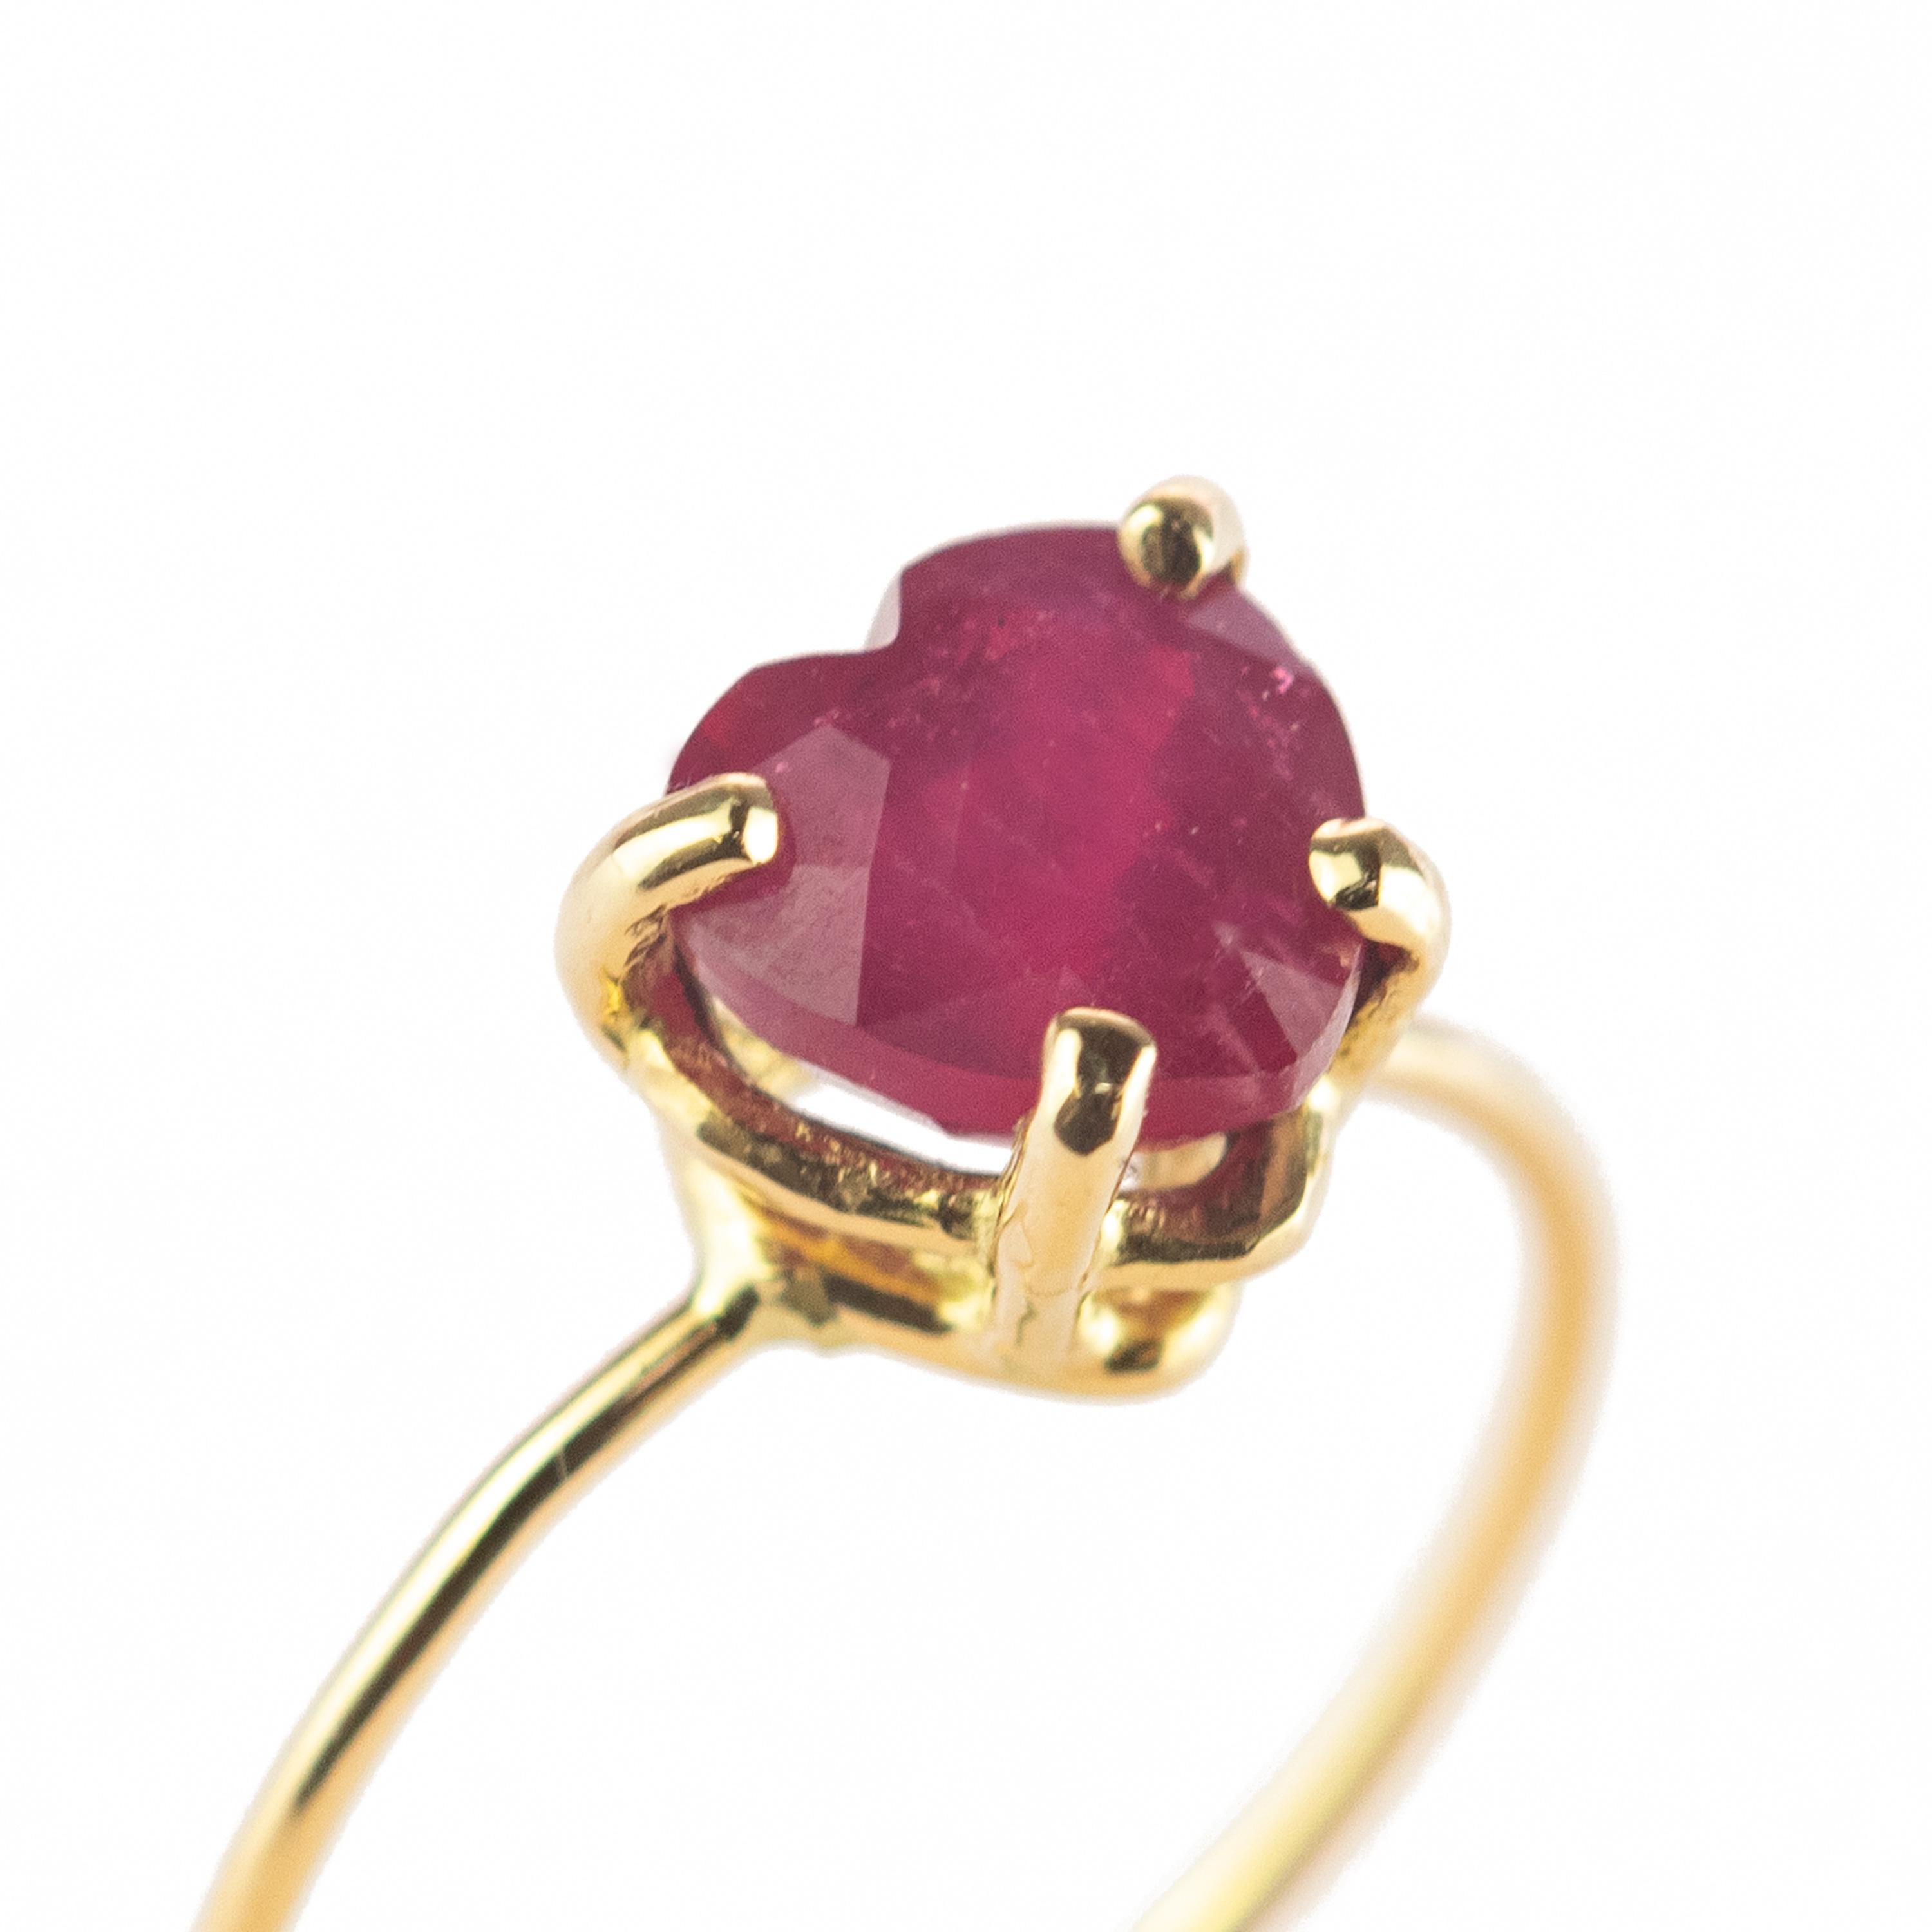 Marvelous handmade 18 karat yellow gold band thin ring embellished with a wonderful heart shaped Ruby. Open your intuition and enhance your senses to love. 

Inspired by strong feeling of love. The beating heart is used as an intensive form of the